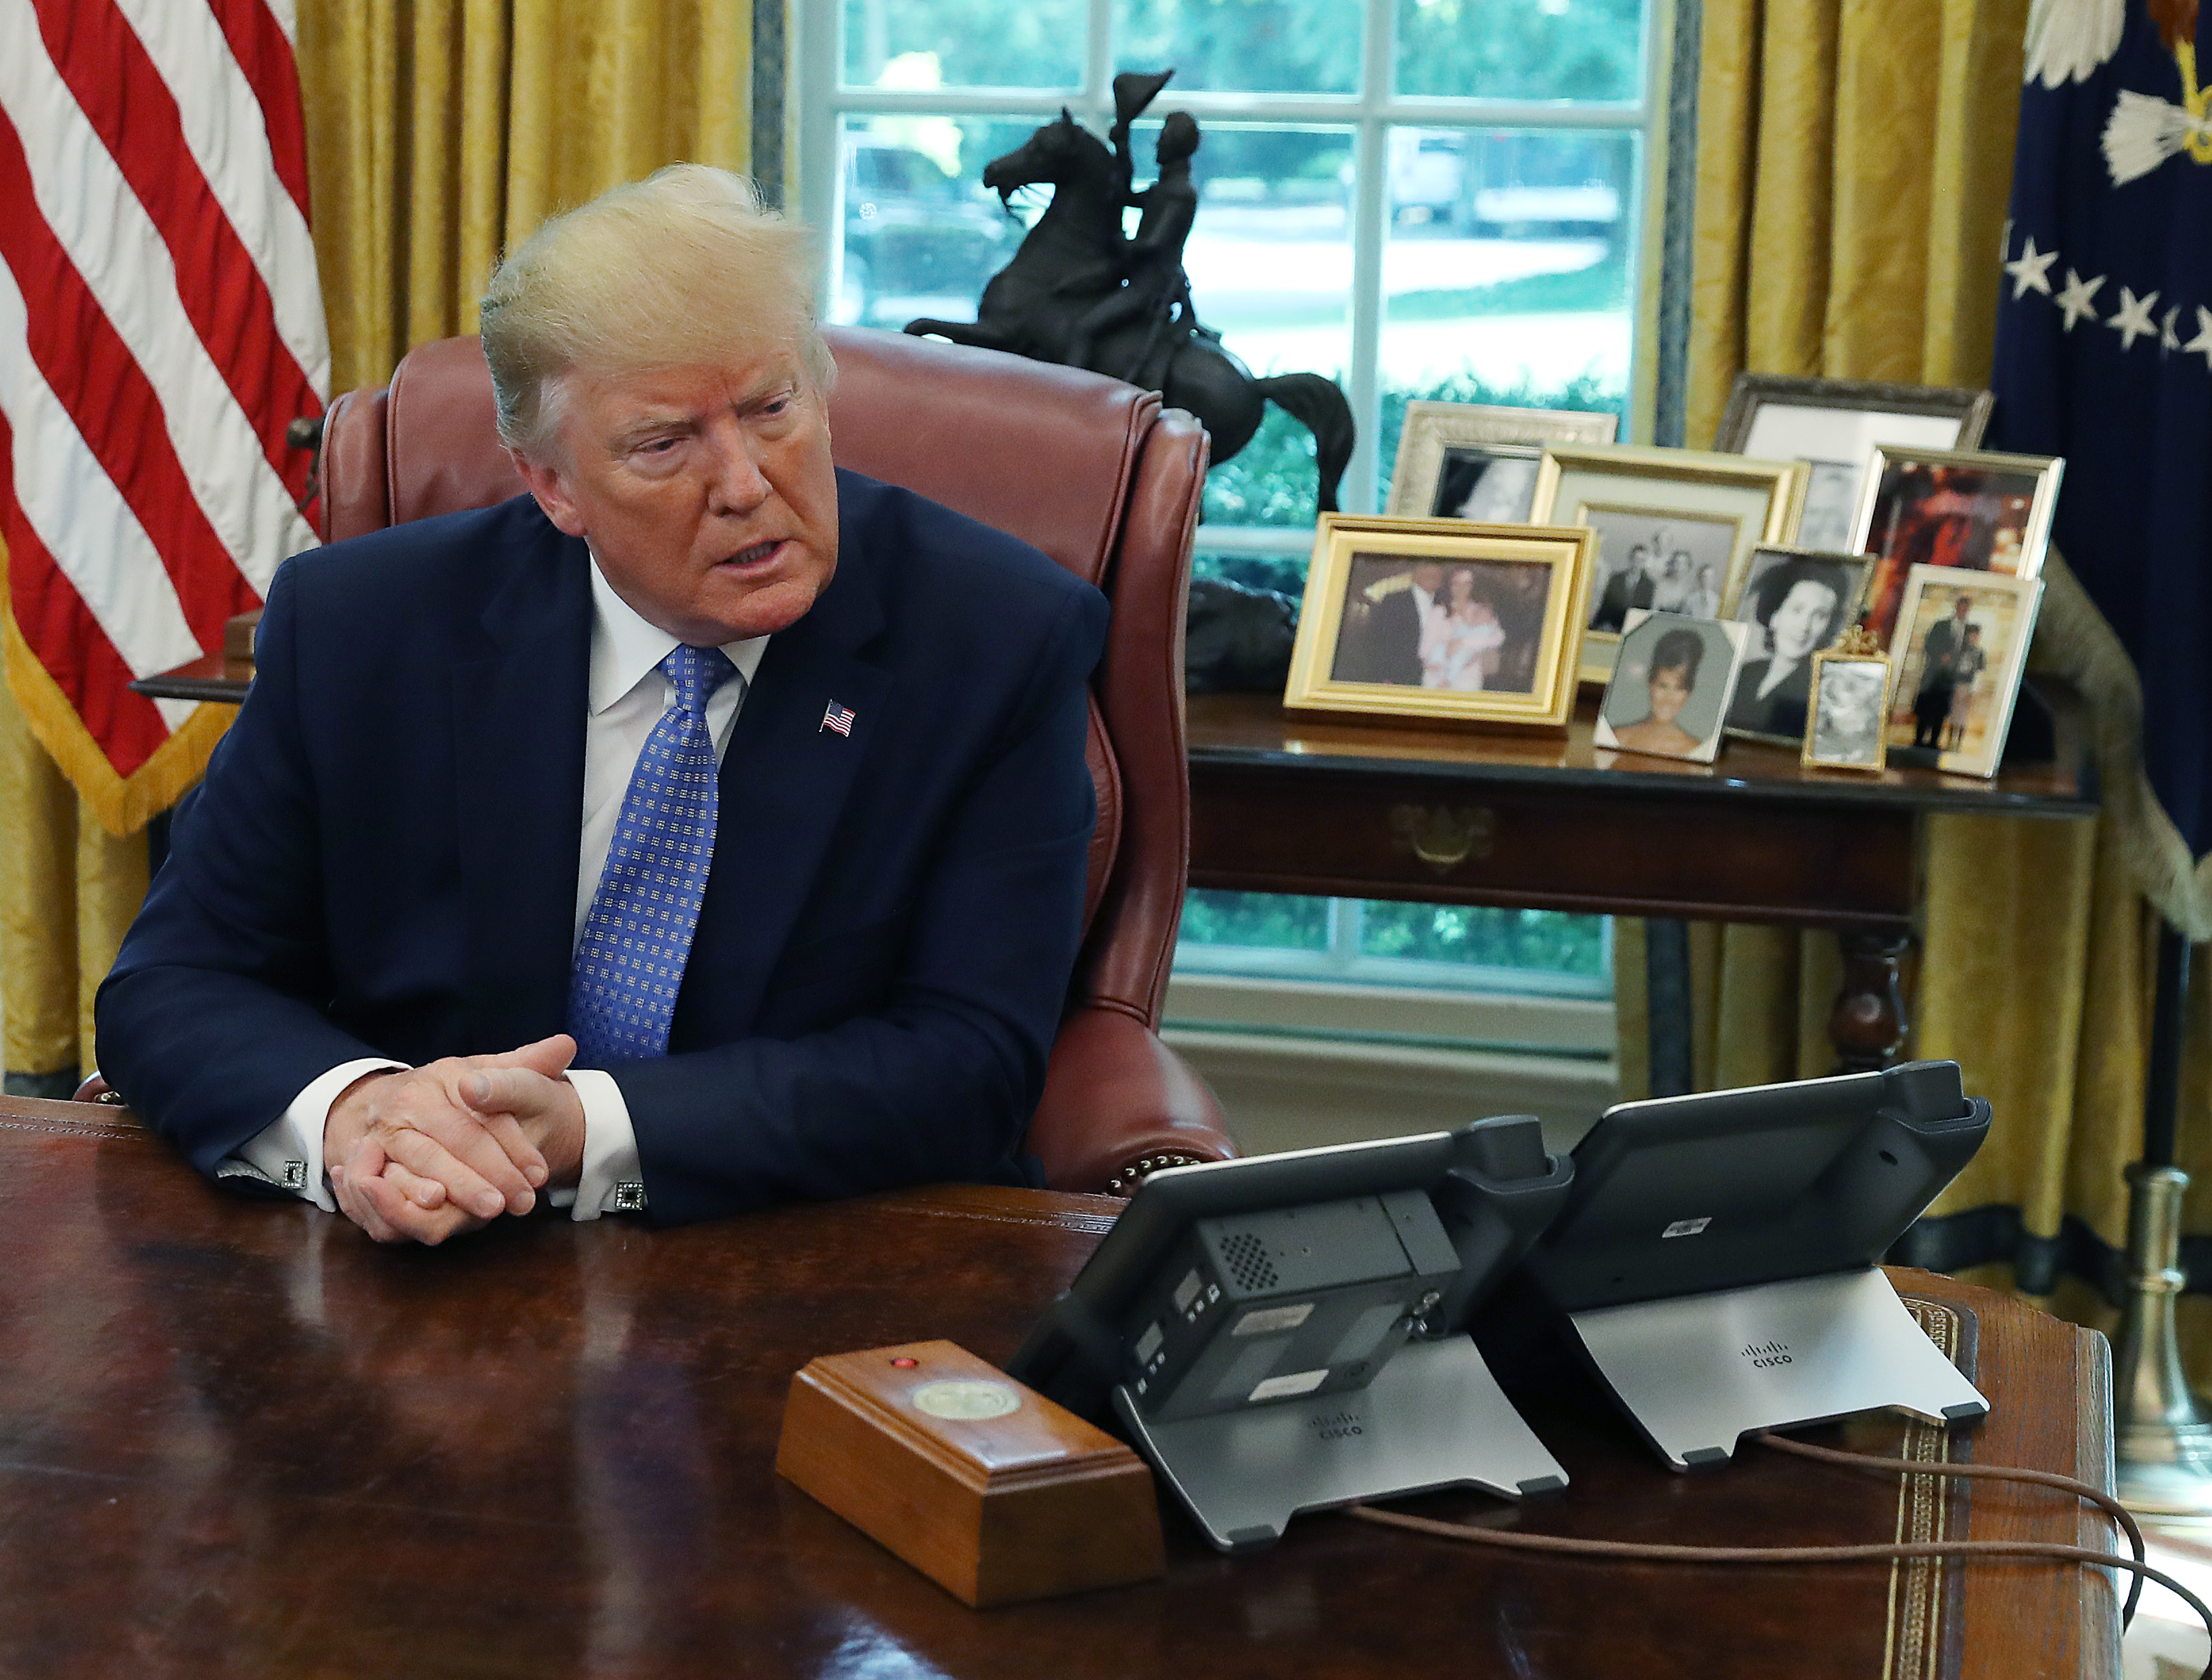 President Donald Trump sitting at his desk in the Oval Office.